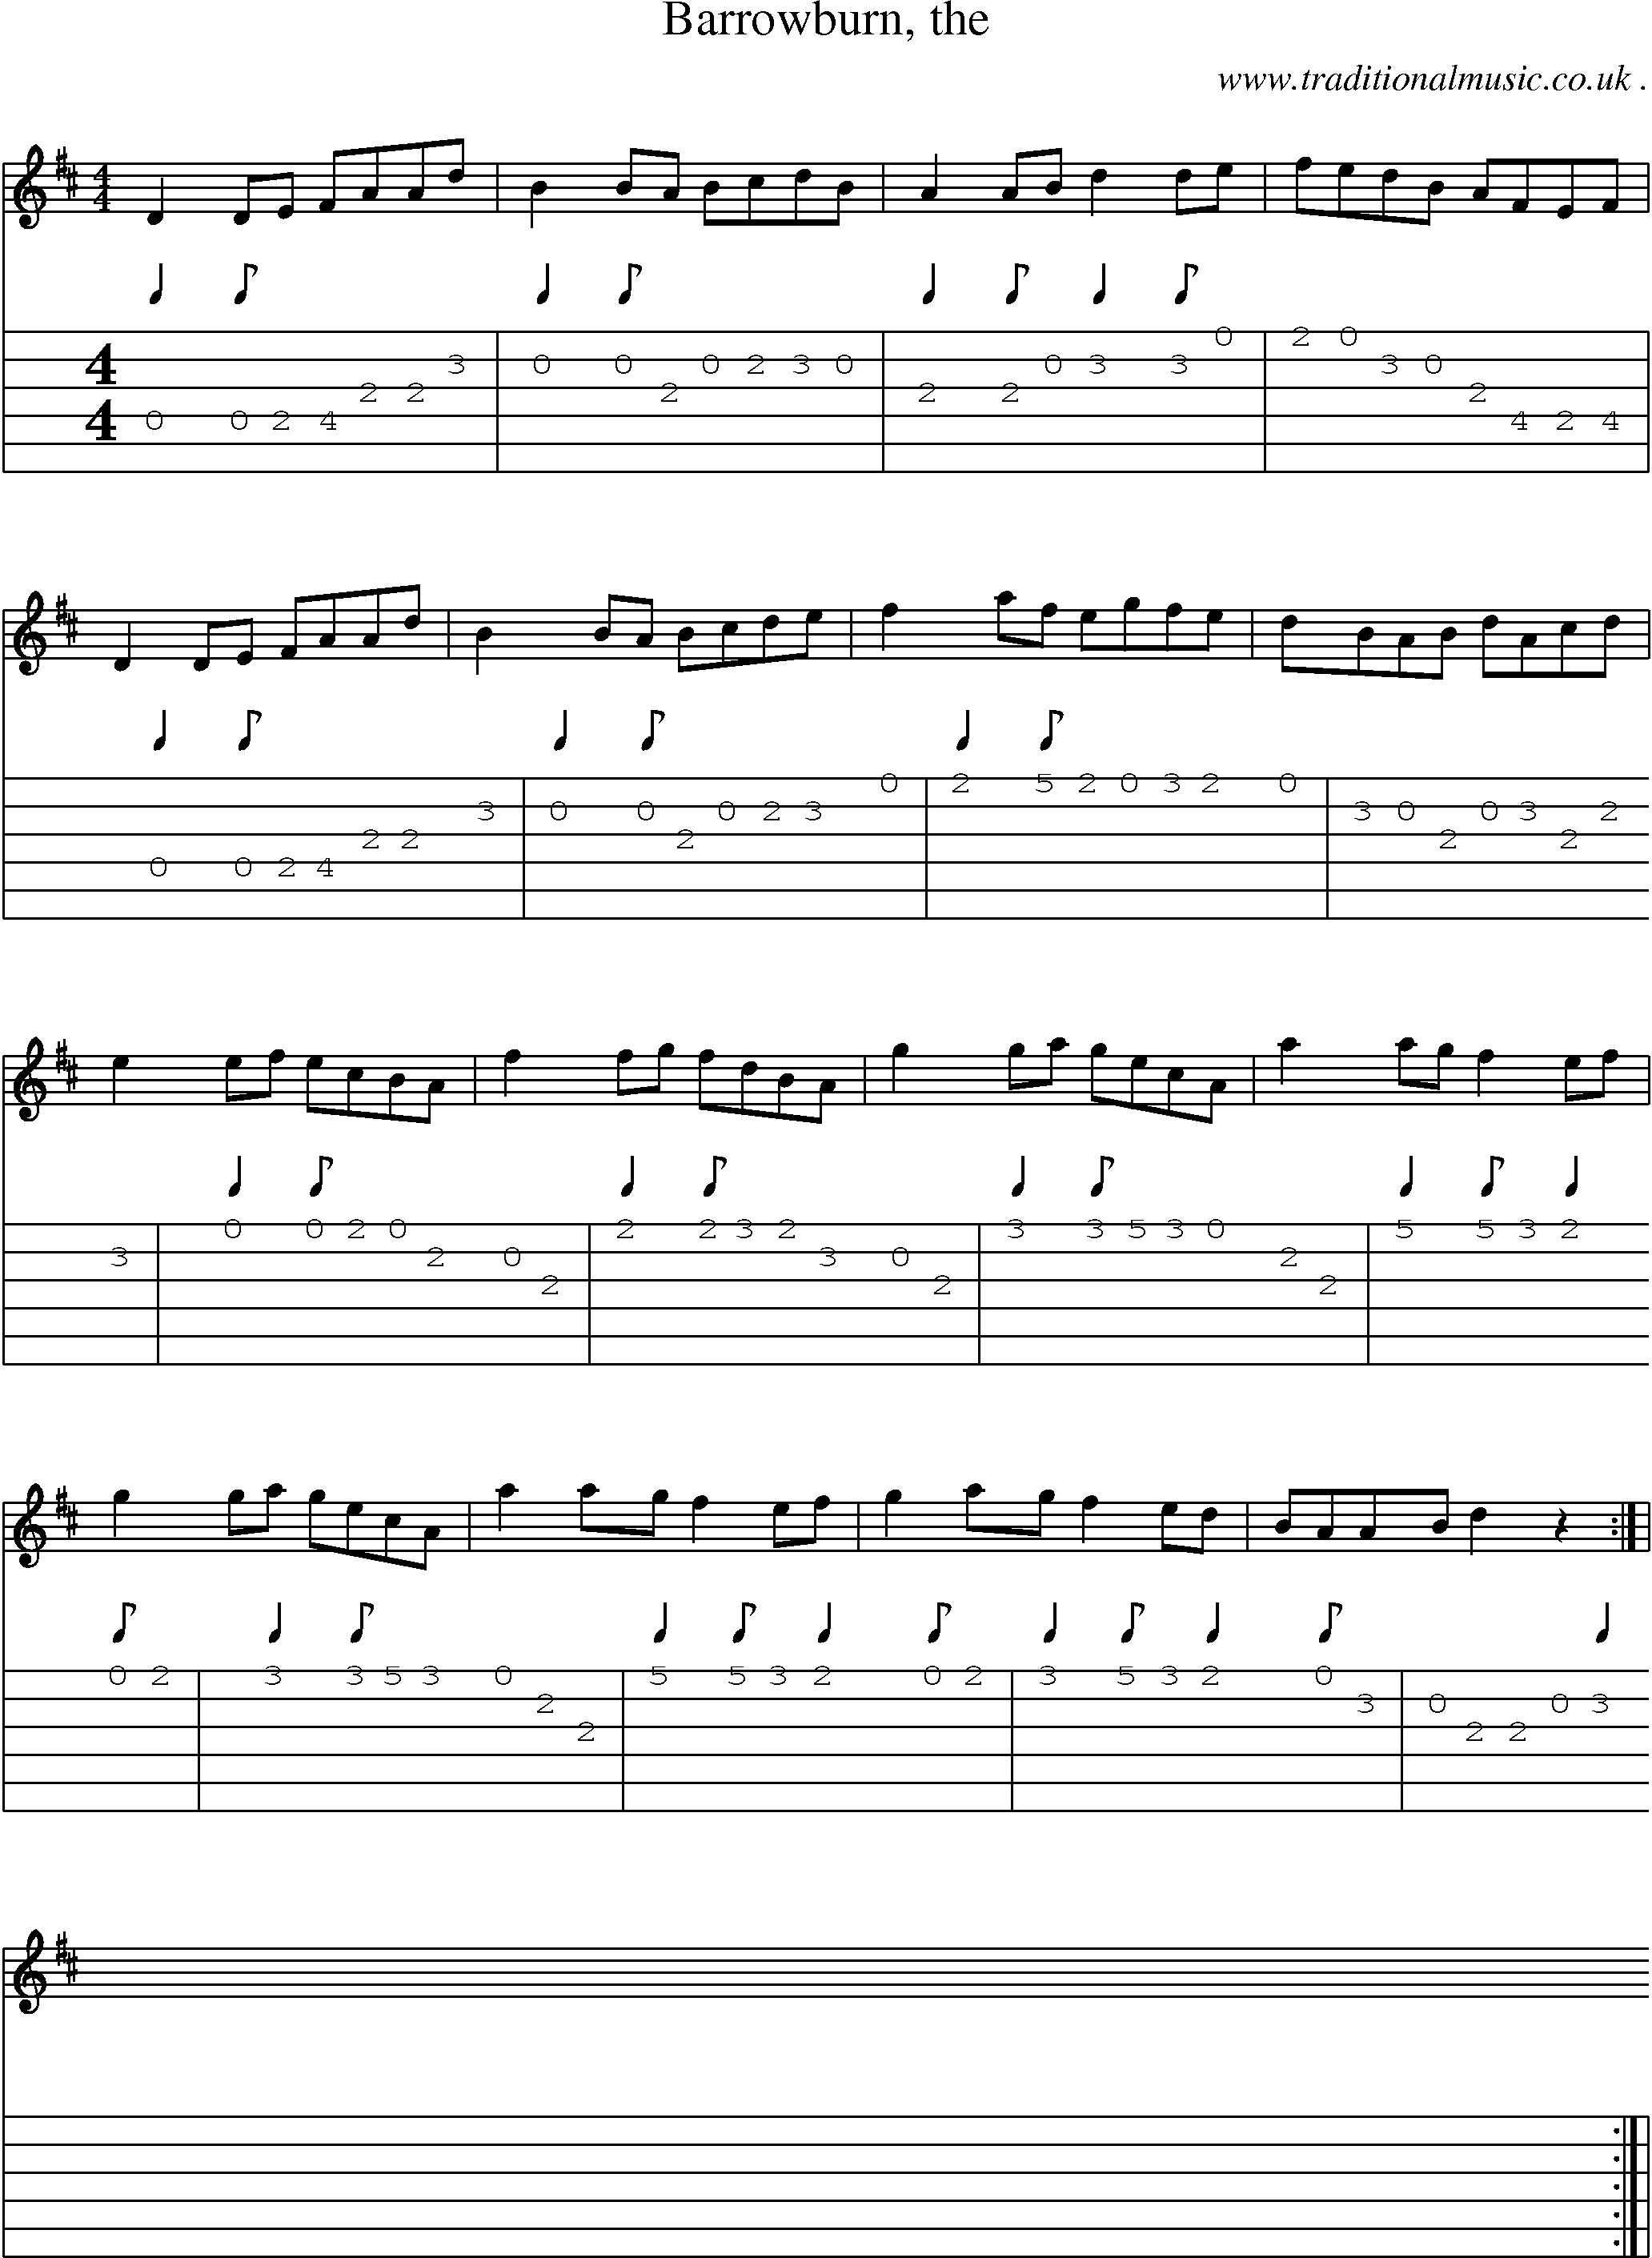 Sheet-music  score, Chords and Guitar Tabs for Barrowburn The